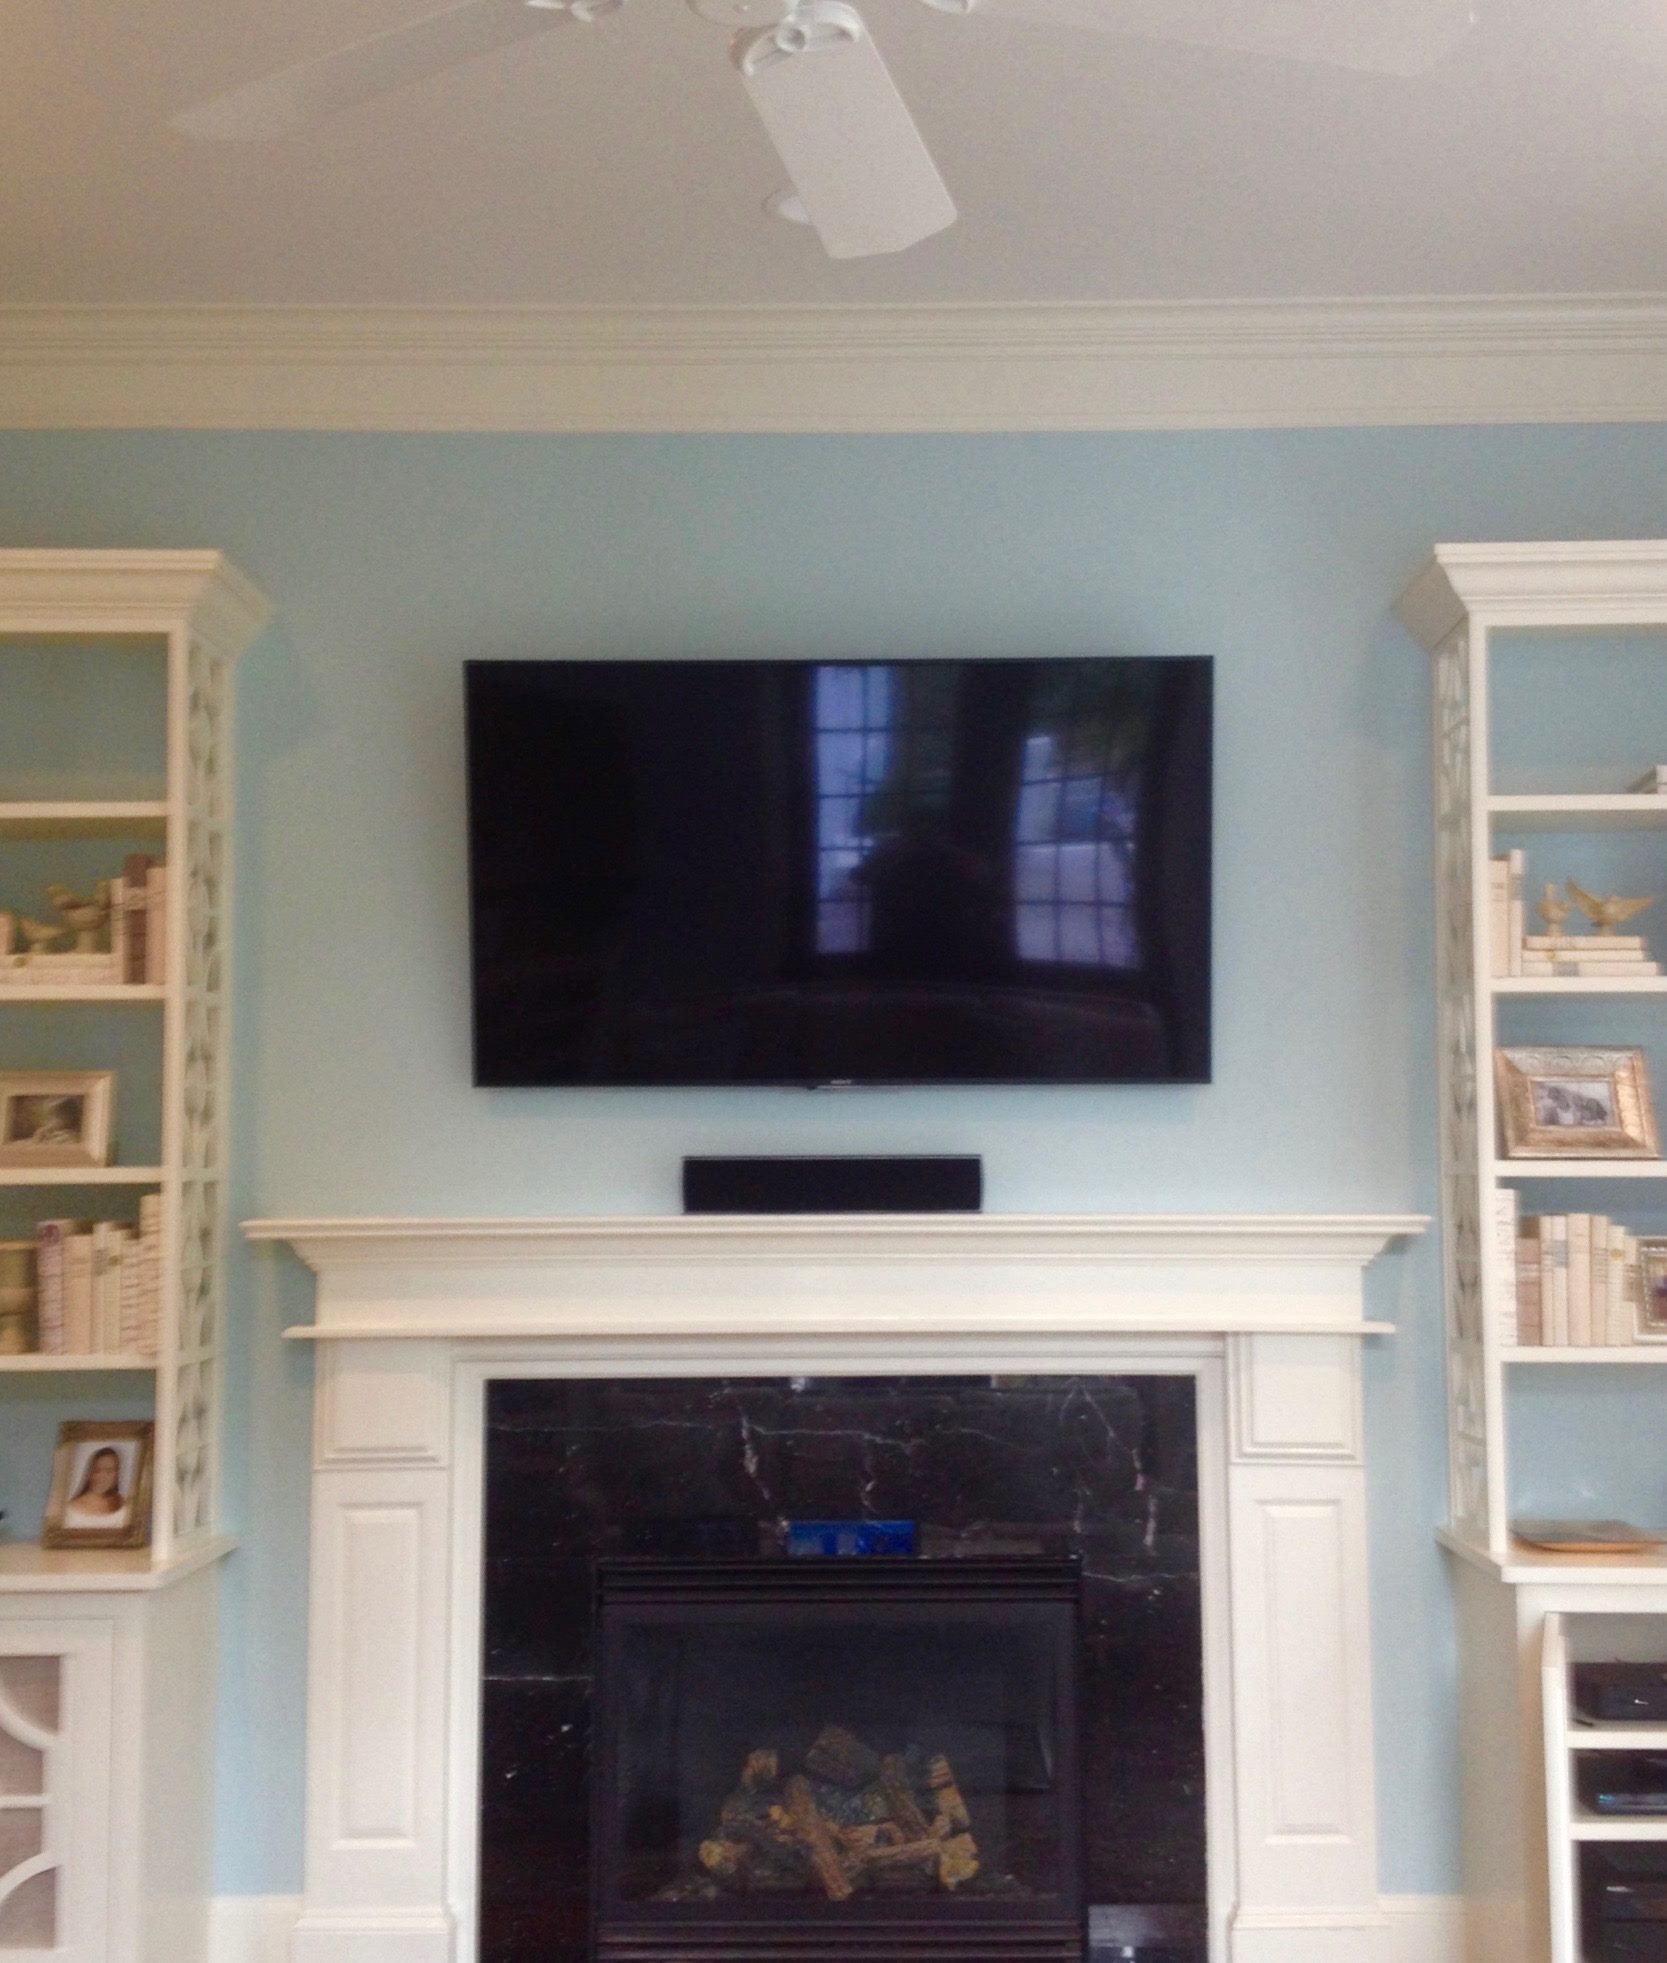 SONY Television and Soundbar over Fireplace